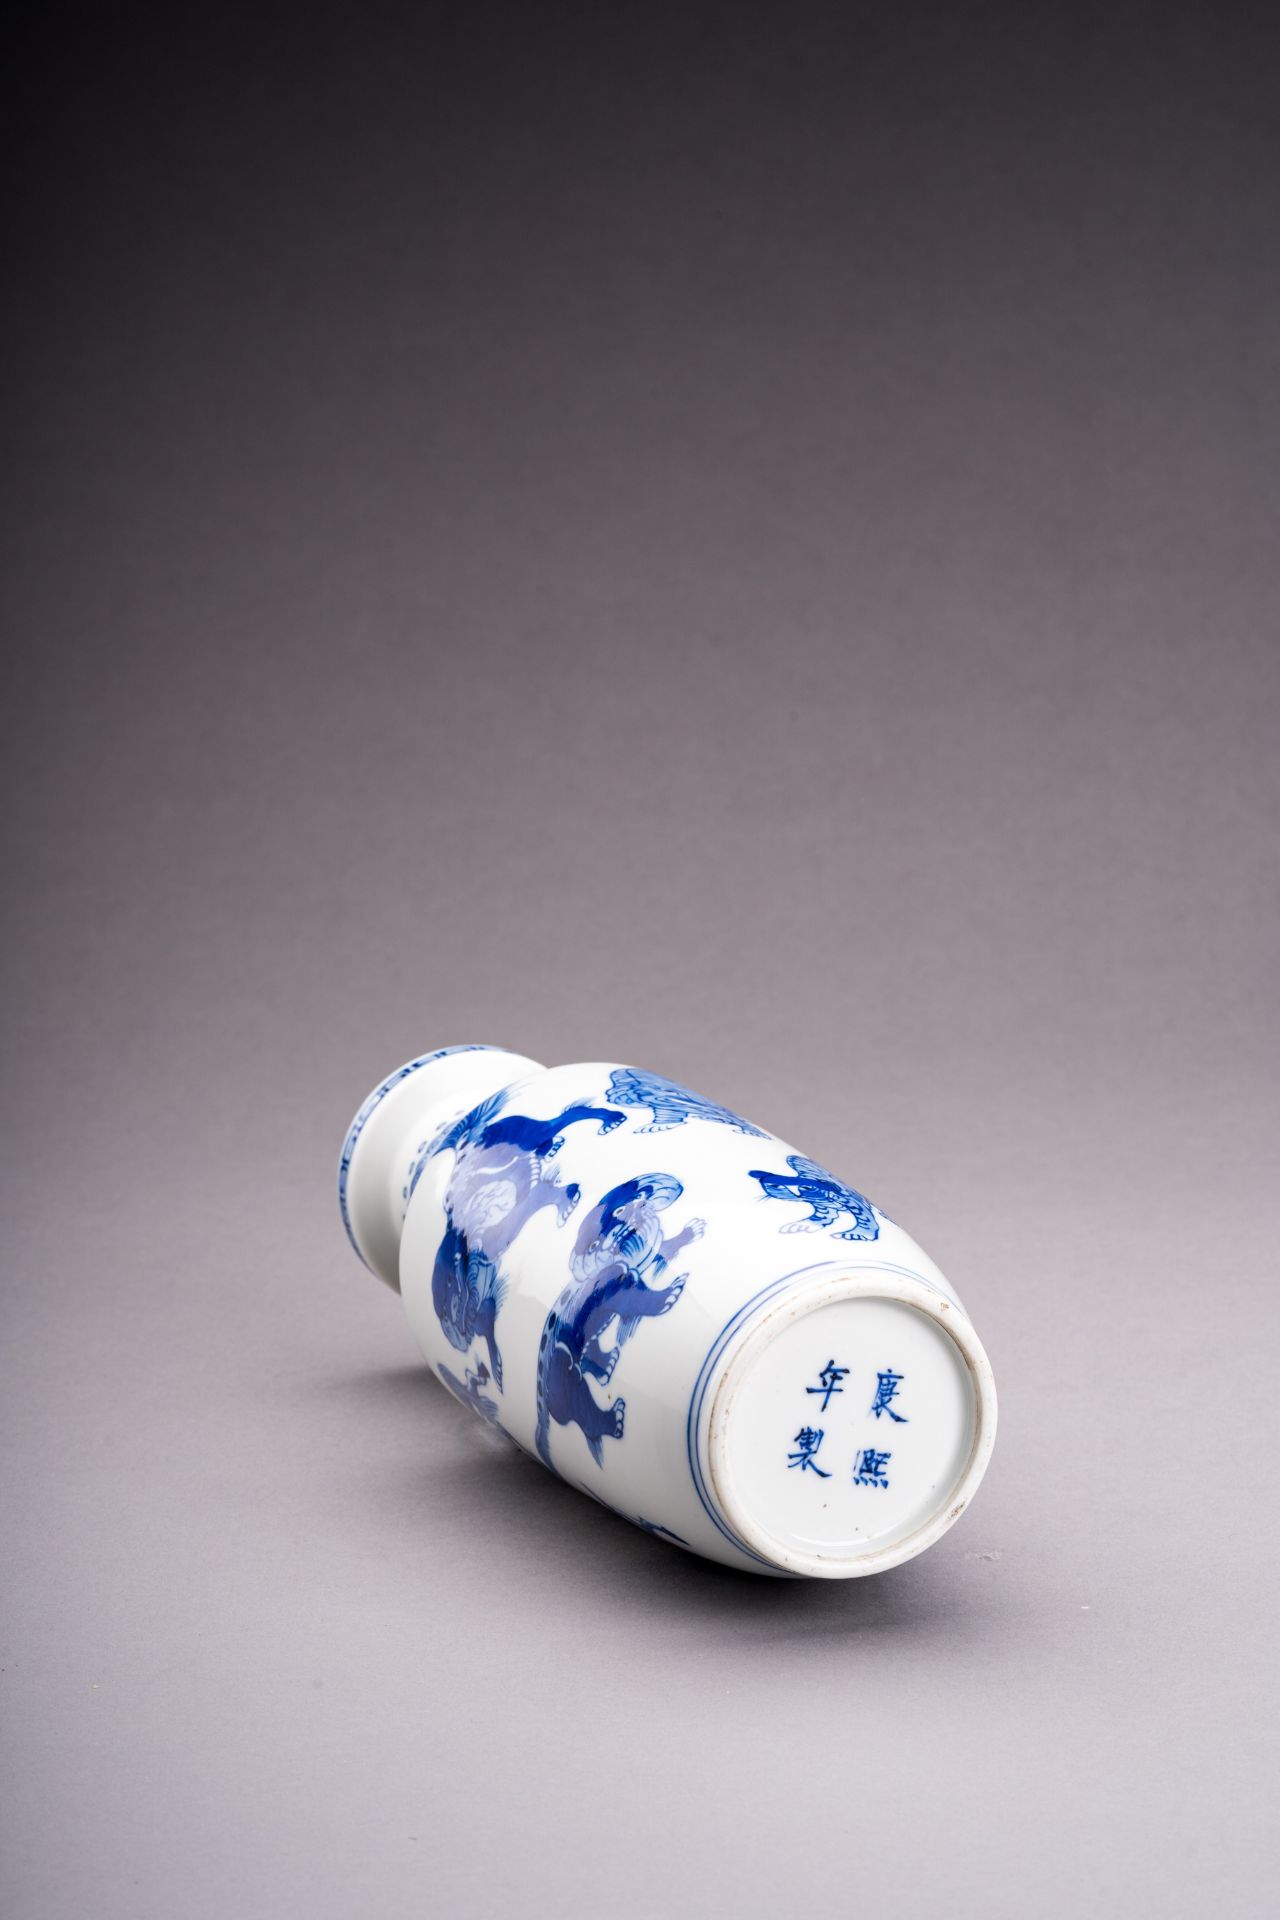 A BLUE AND WHITE PORCELAIN ROULEAU VASE - Image 7 of 8